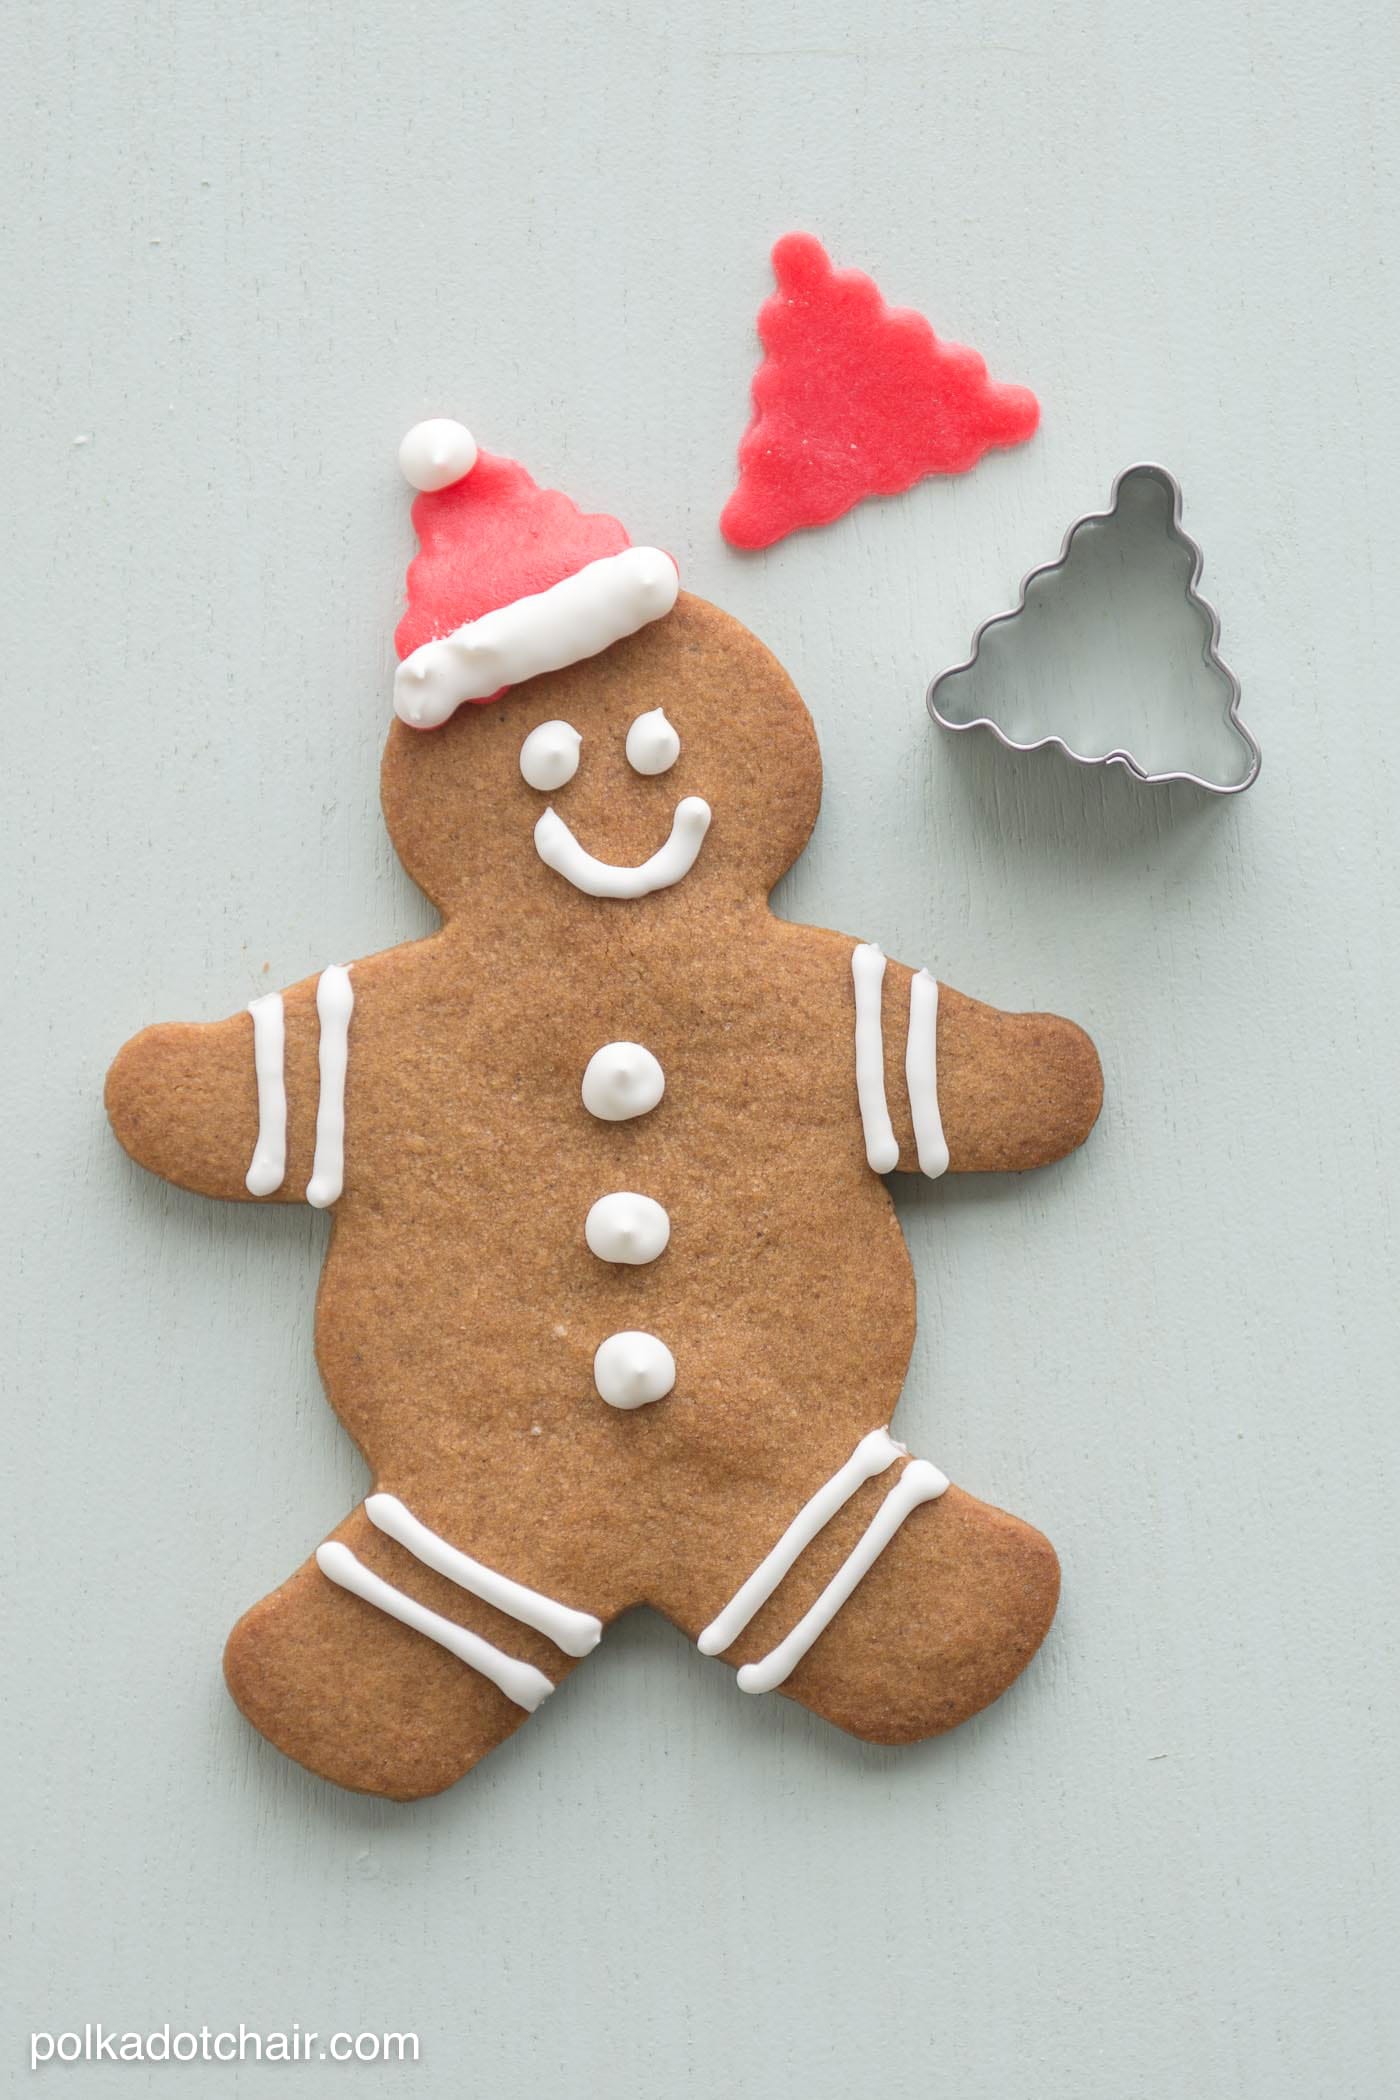 Gingerbread Cookie Decorating Ideas - The Polka Dot Chair